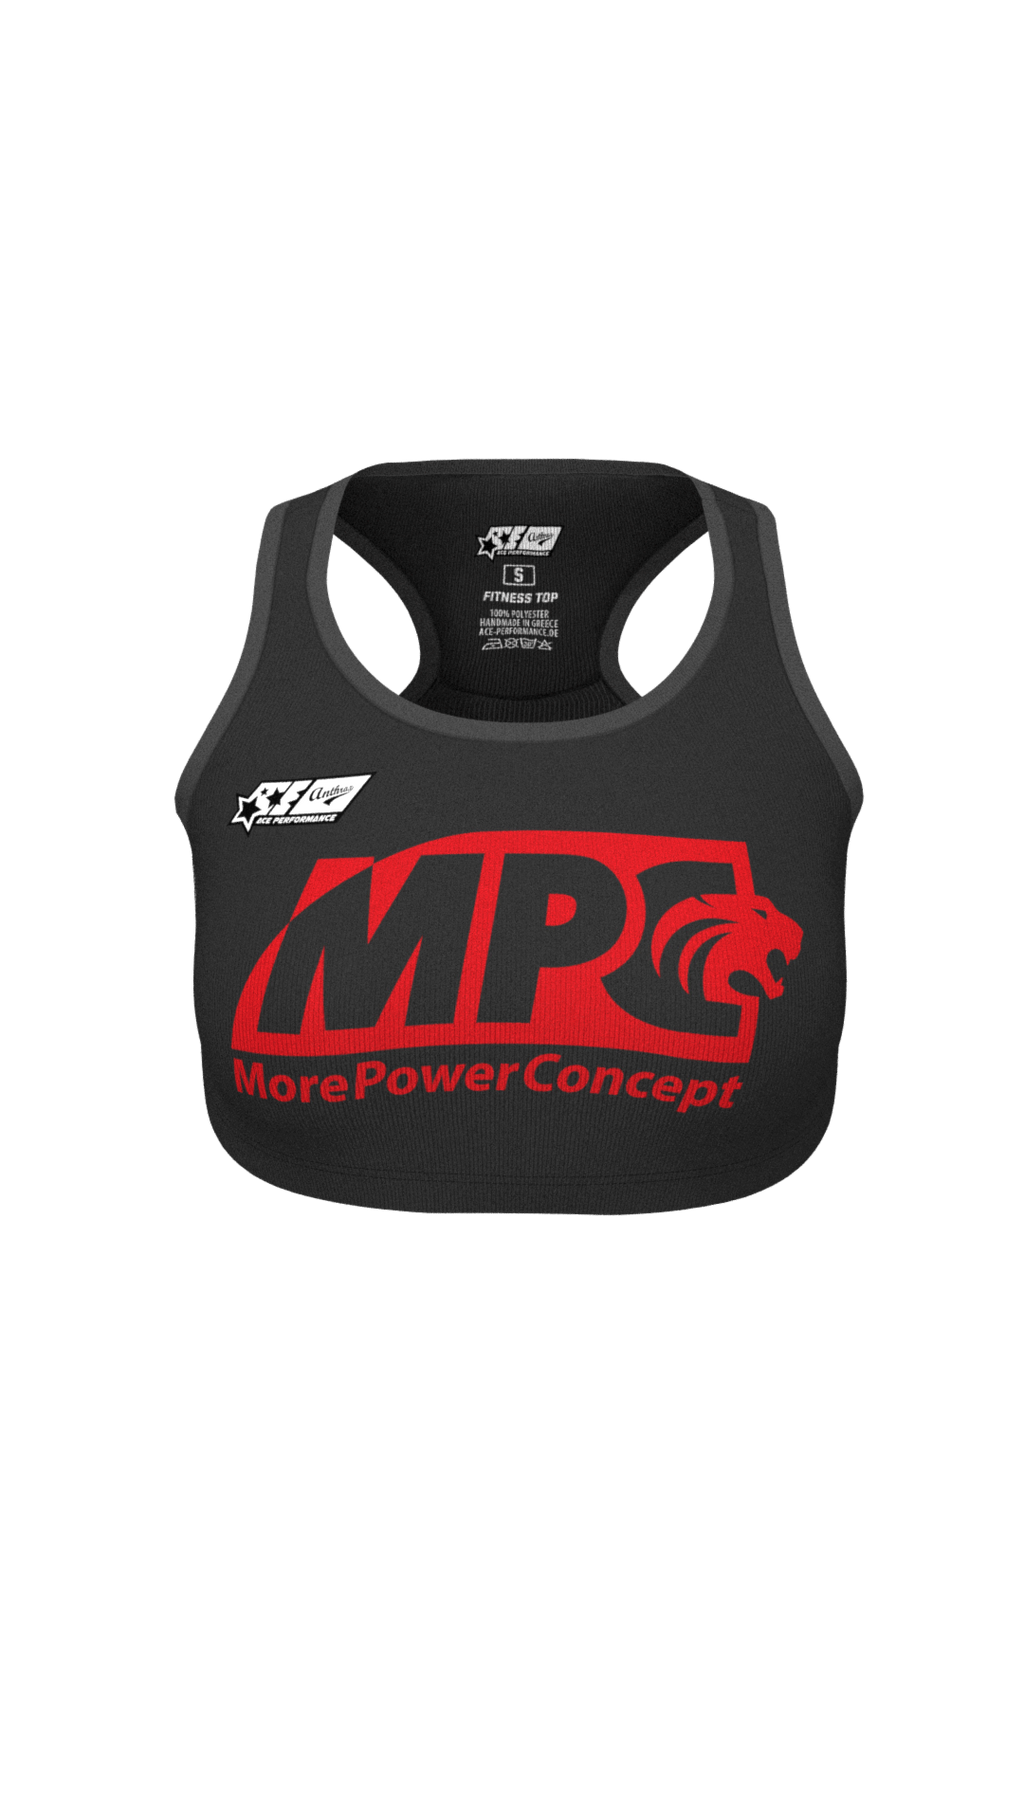 WOMENS FITNESS TOP - MPC - ACEPERFORMANCE